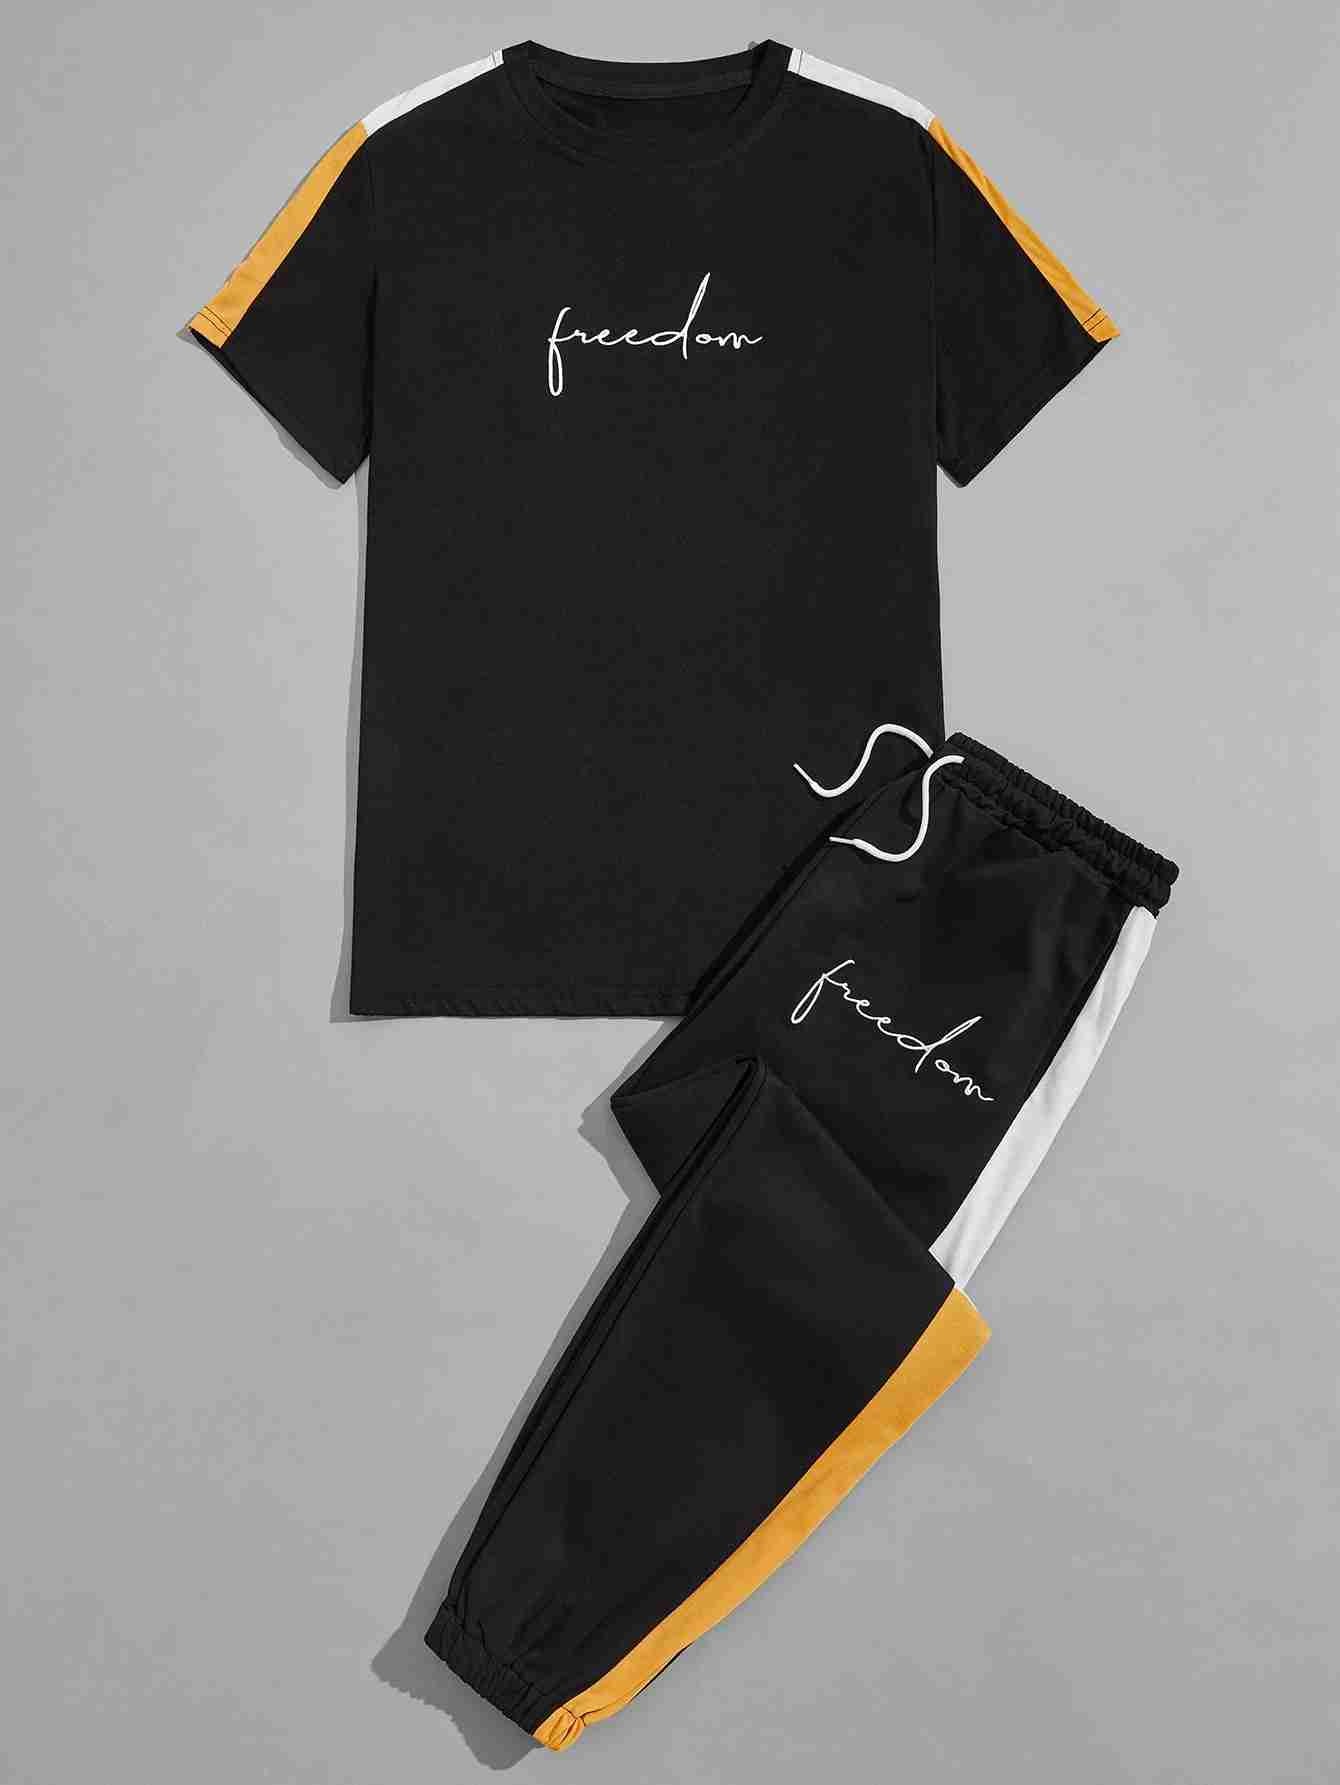 Freedom Black Tracksuit With Yellow & White Pannel